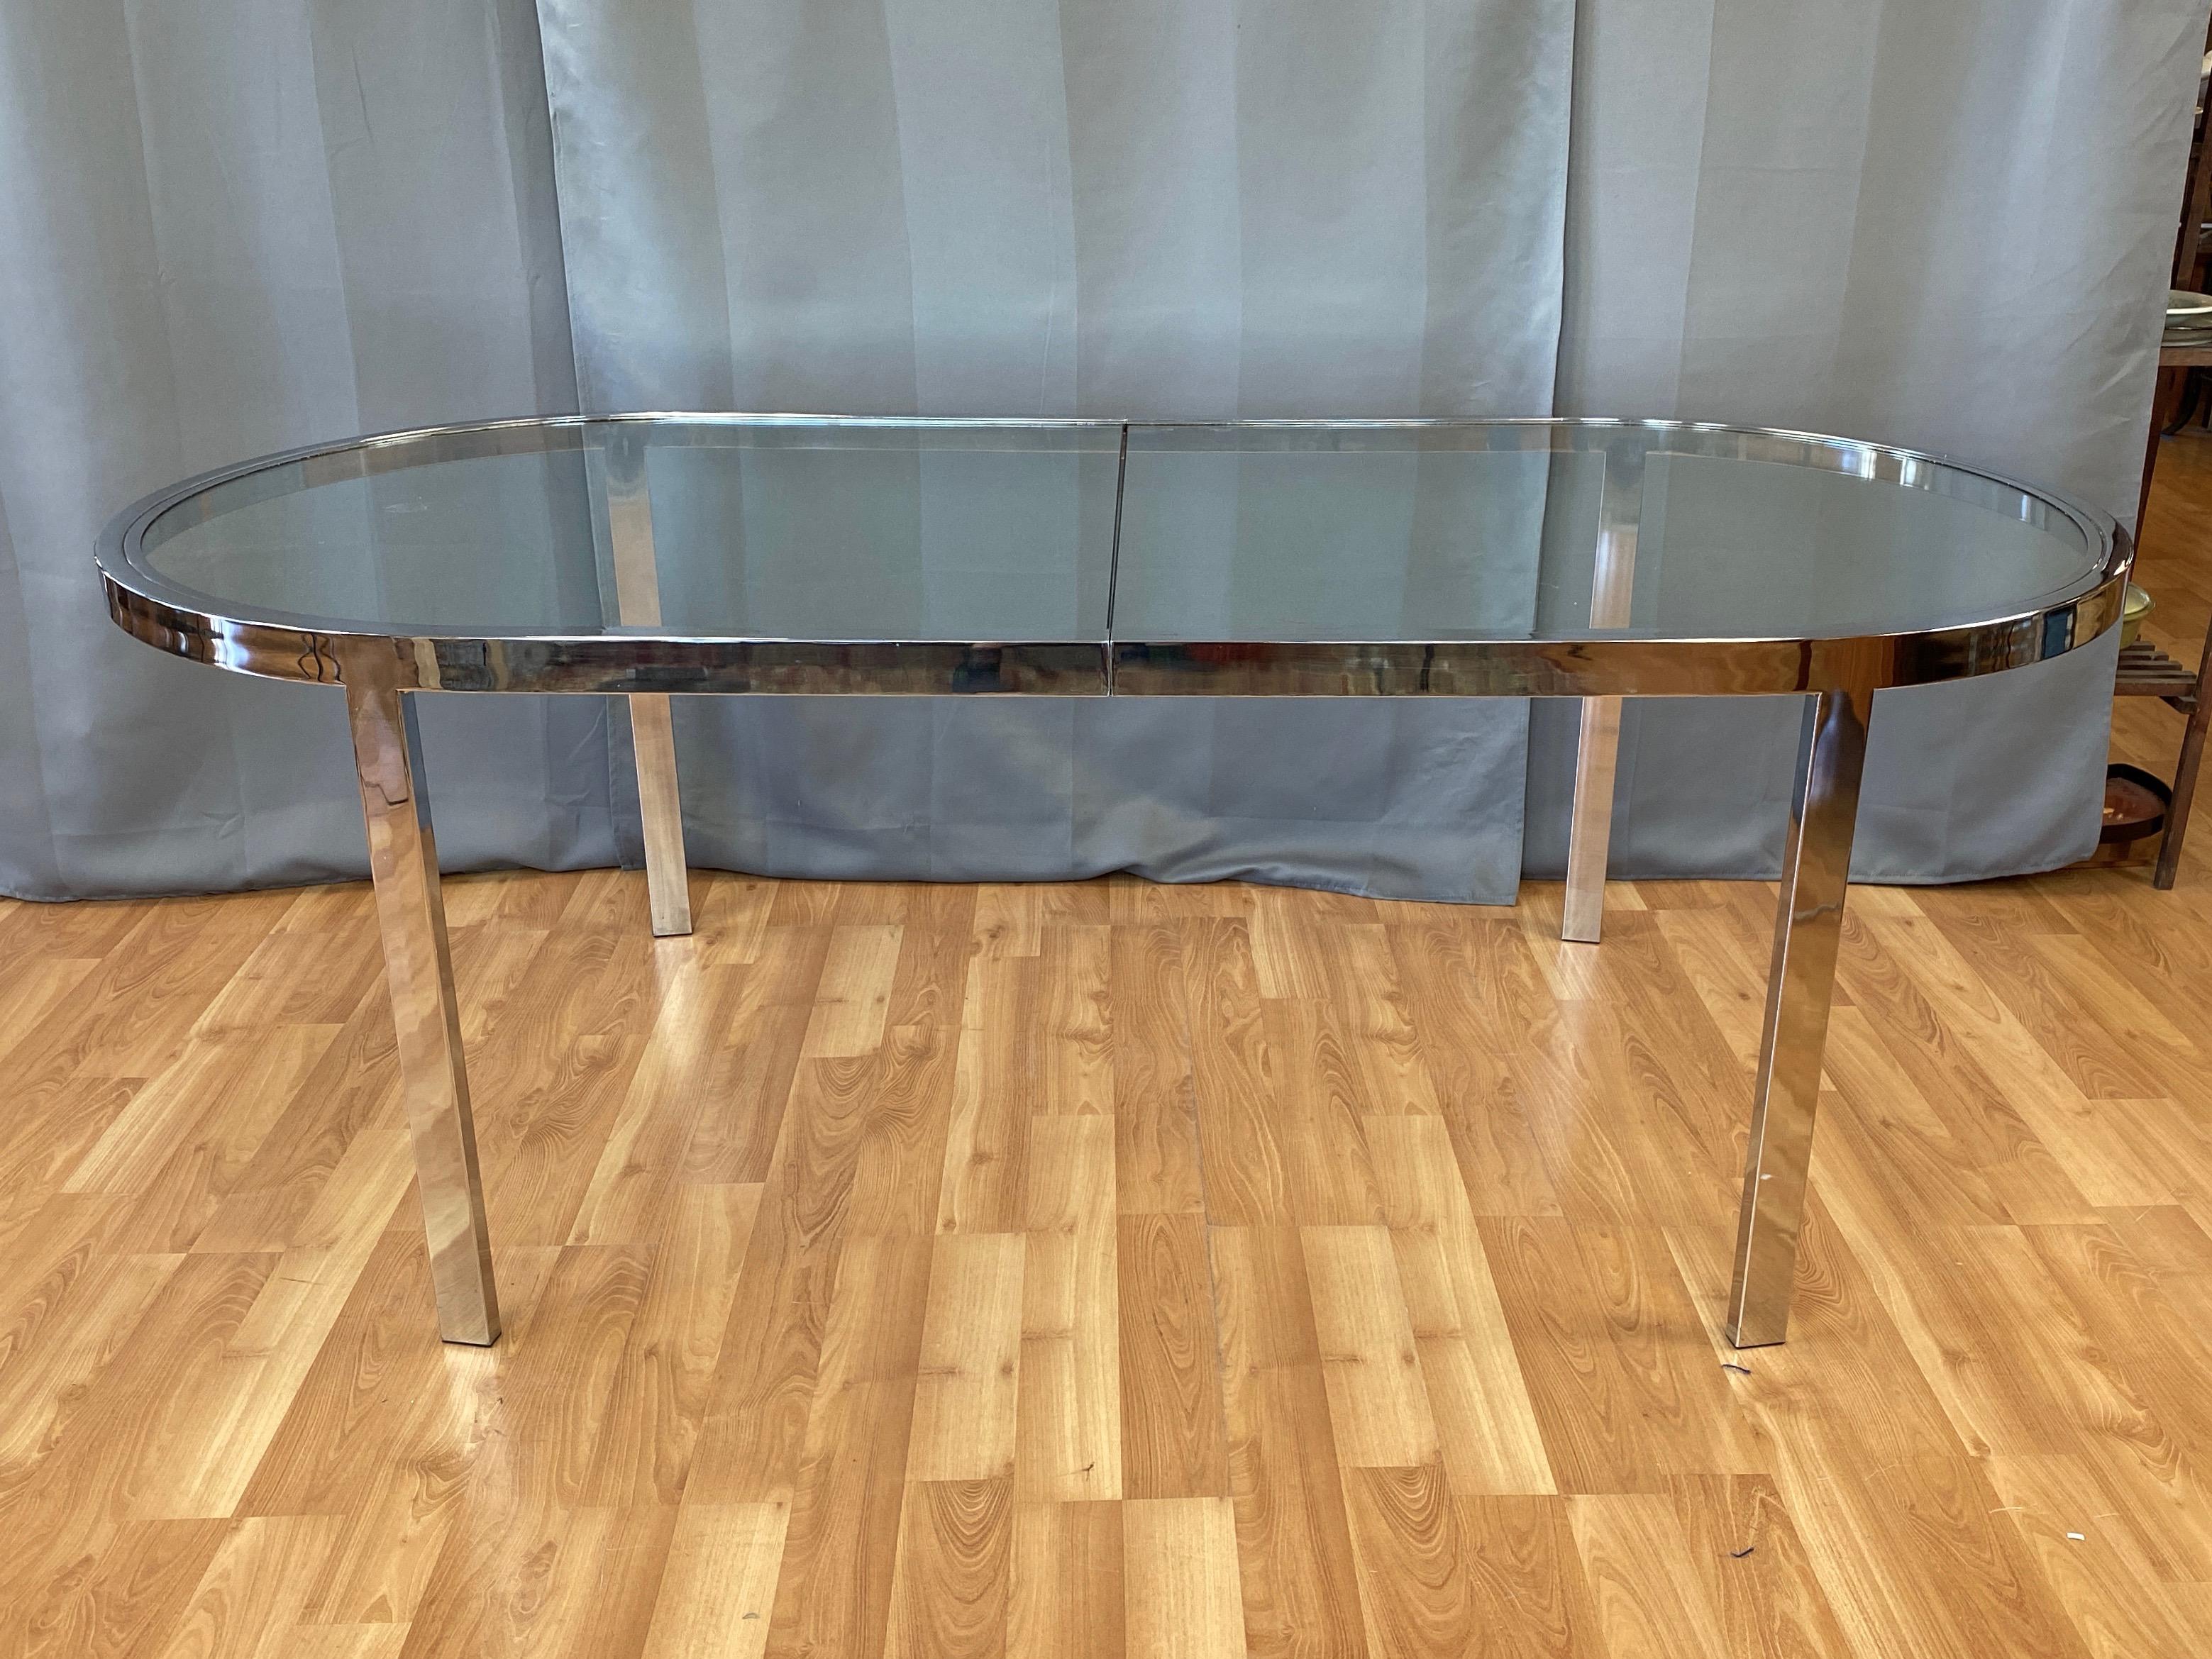 A super sleek 1970s chrome and glass dining table by Milo Baughman, master of American Mid-Century Modern Minimalism. 

Clean-lined racetrack frame and legs of flat bar-like chromed steel meet seamlessly at geometric points that handsomely bridge